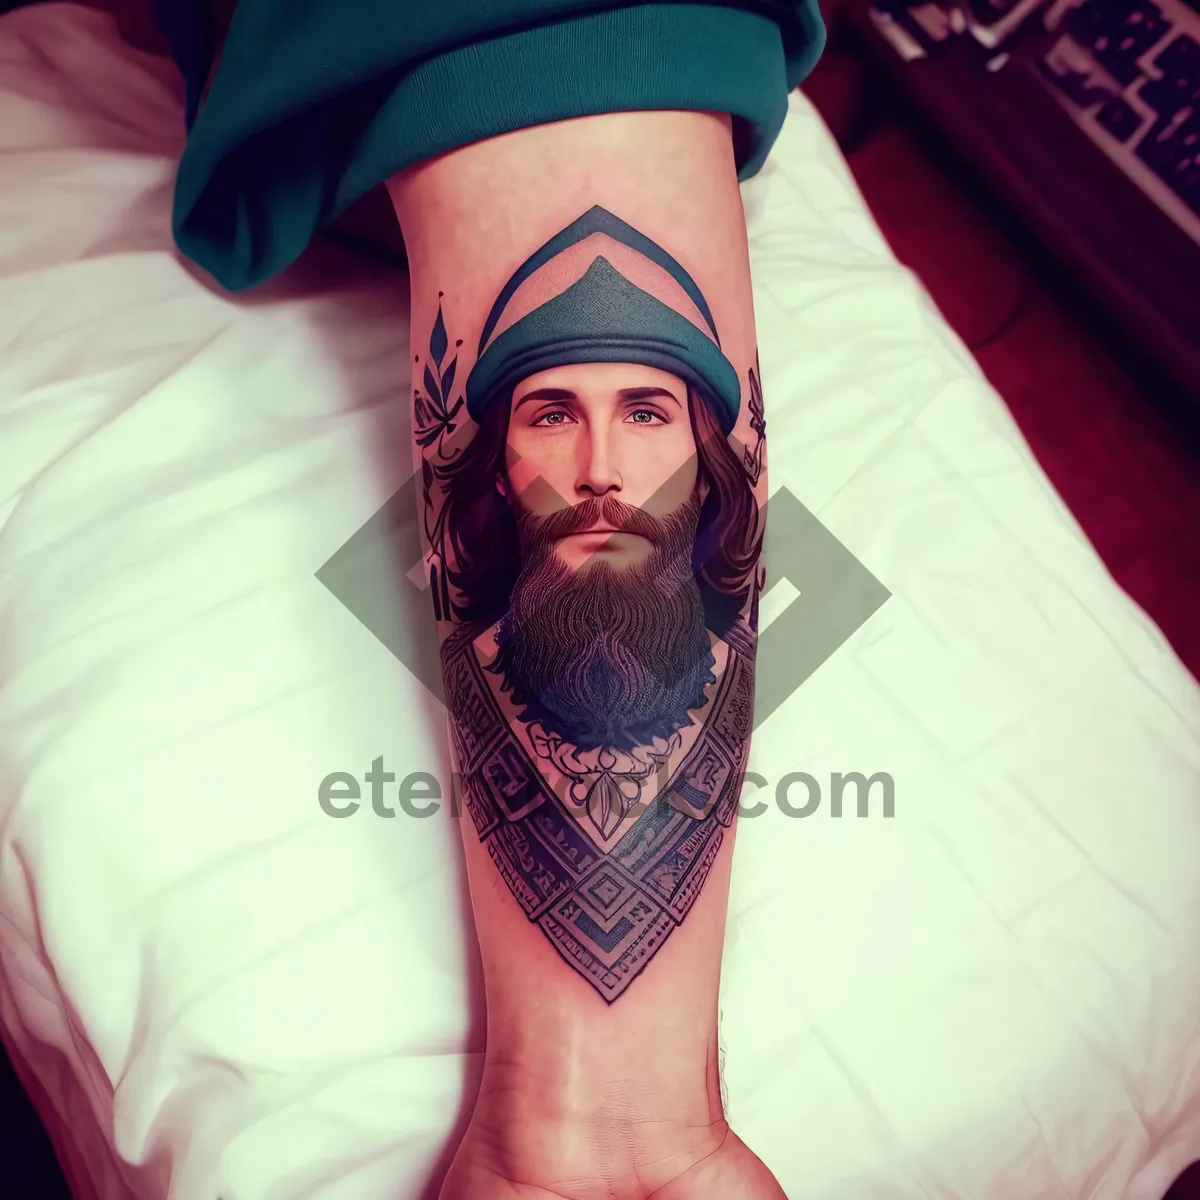 Picture of Stylish Stocking Tattoo: Fashionable Footwear and Hosiery Decoration